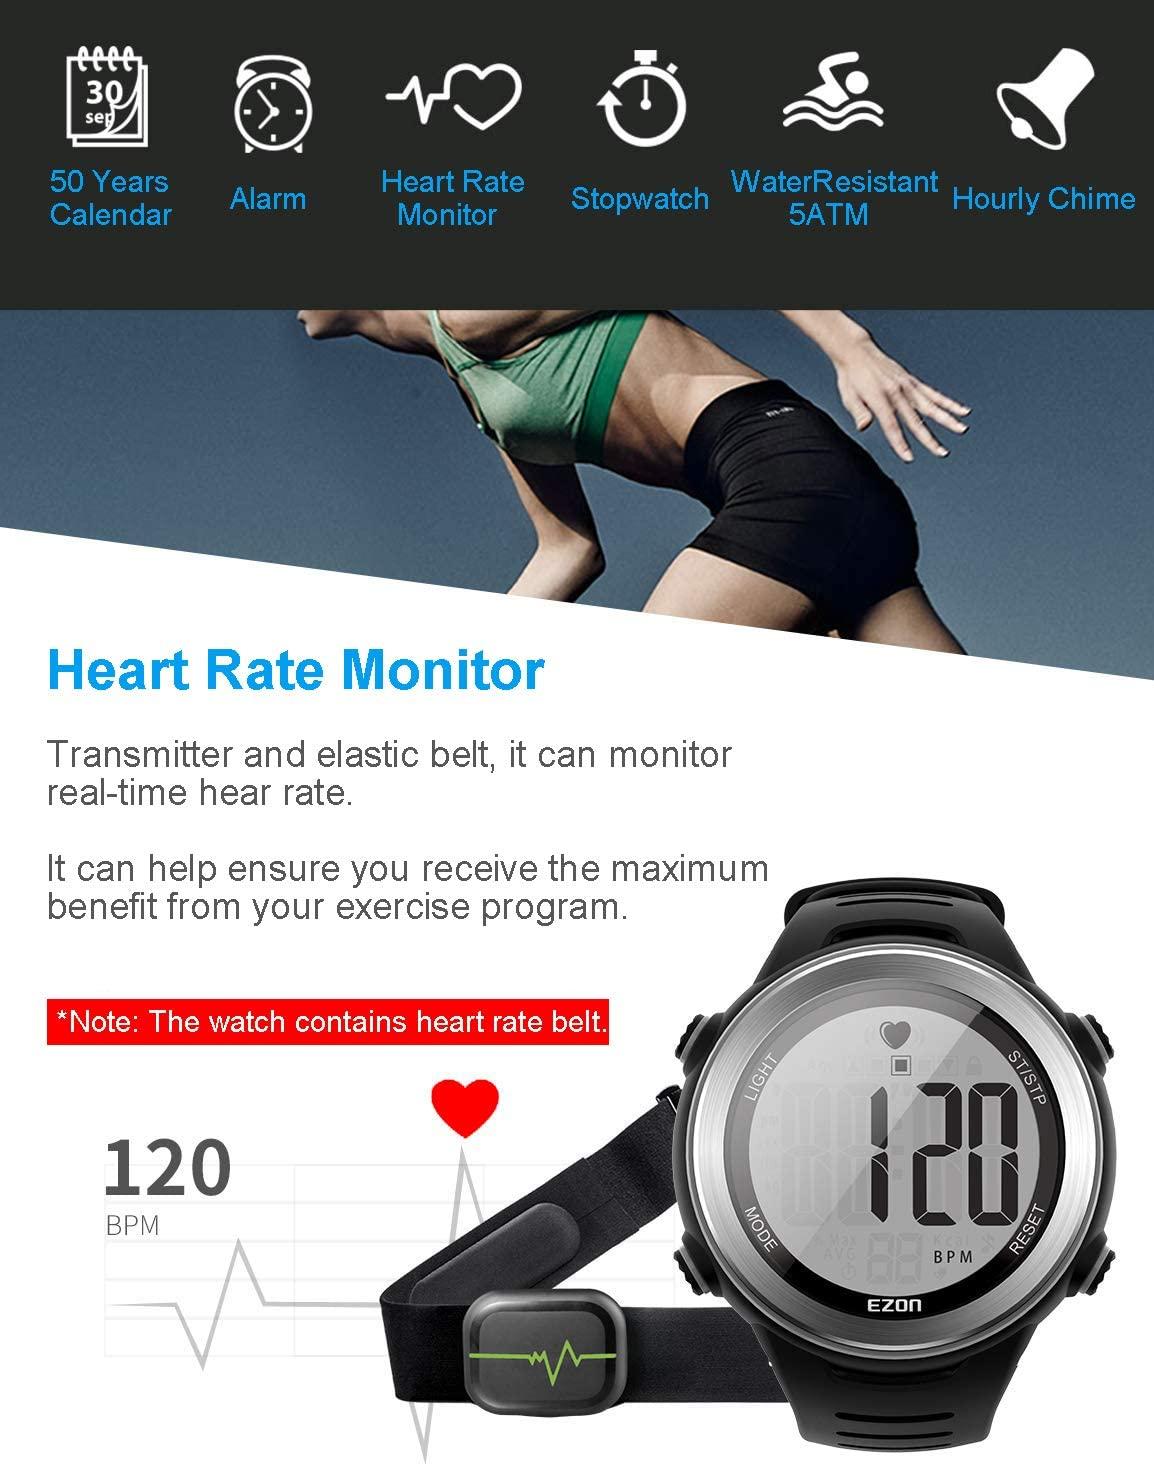 Heart rate sports watch